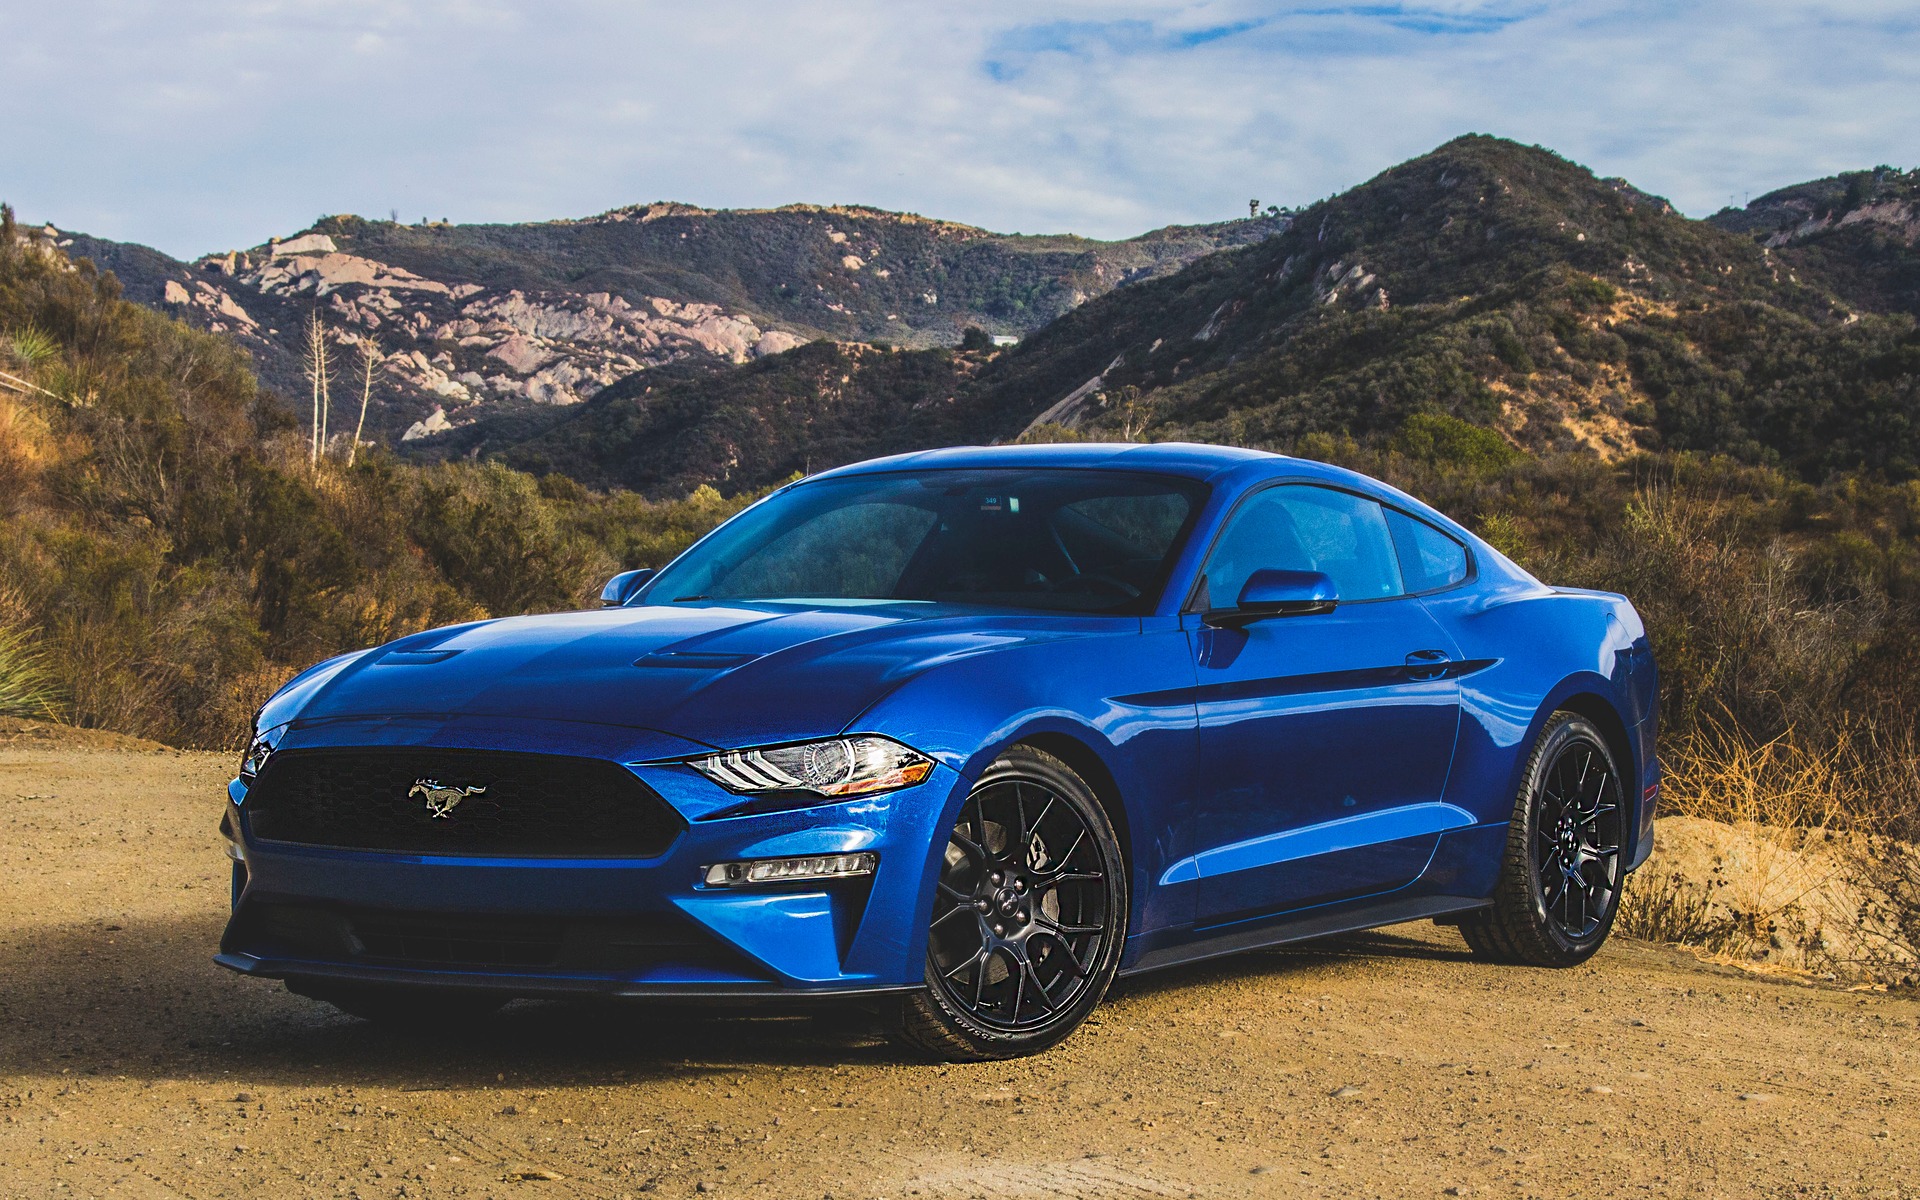 2018 Ford Mustang - The Muscle Car GuysThe Muscle Car Guys